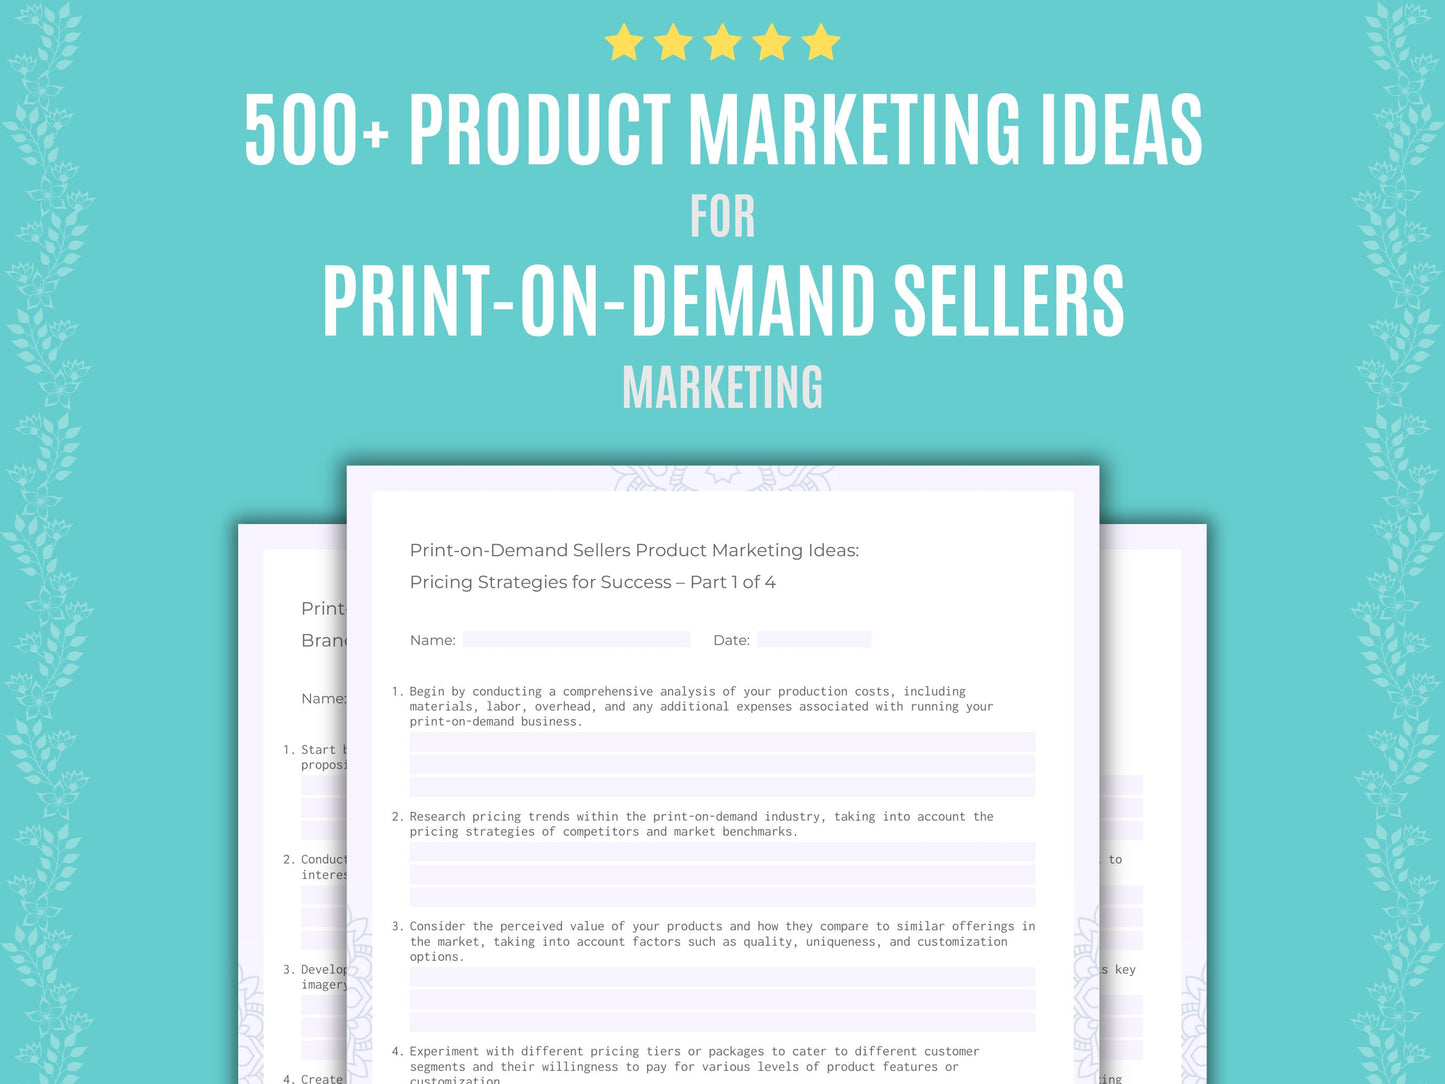 Print-on-Demand Sellers Product Marketing Ideas Worksheets